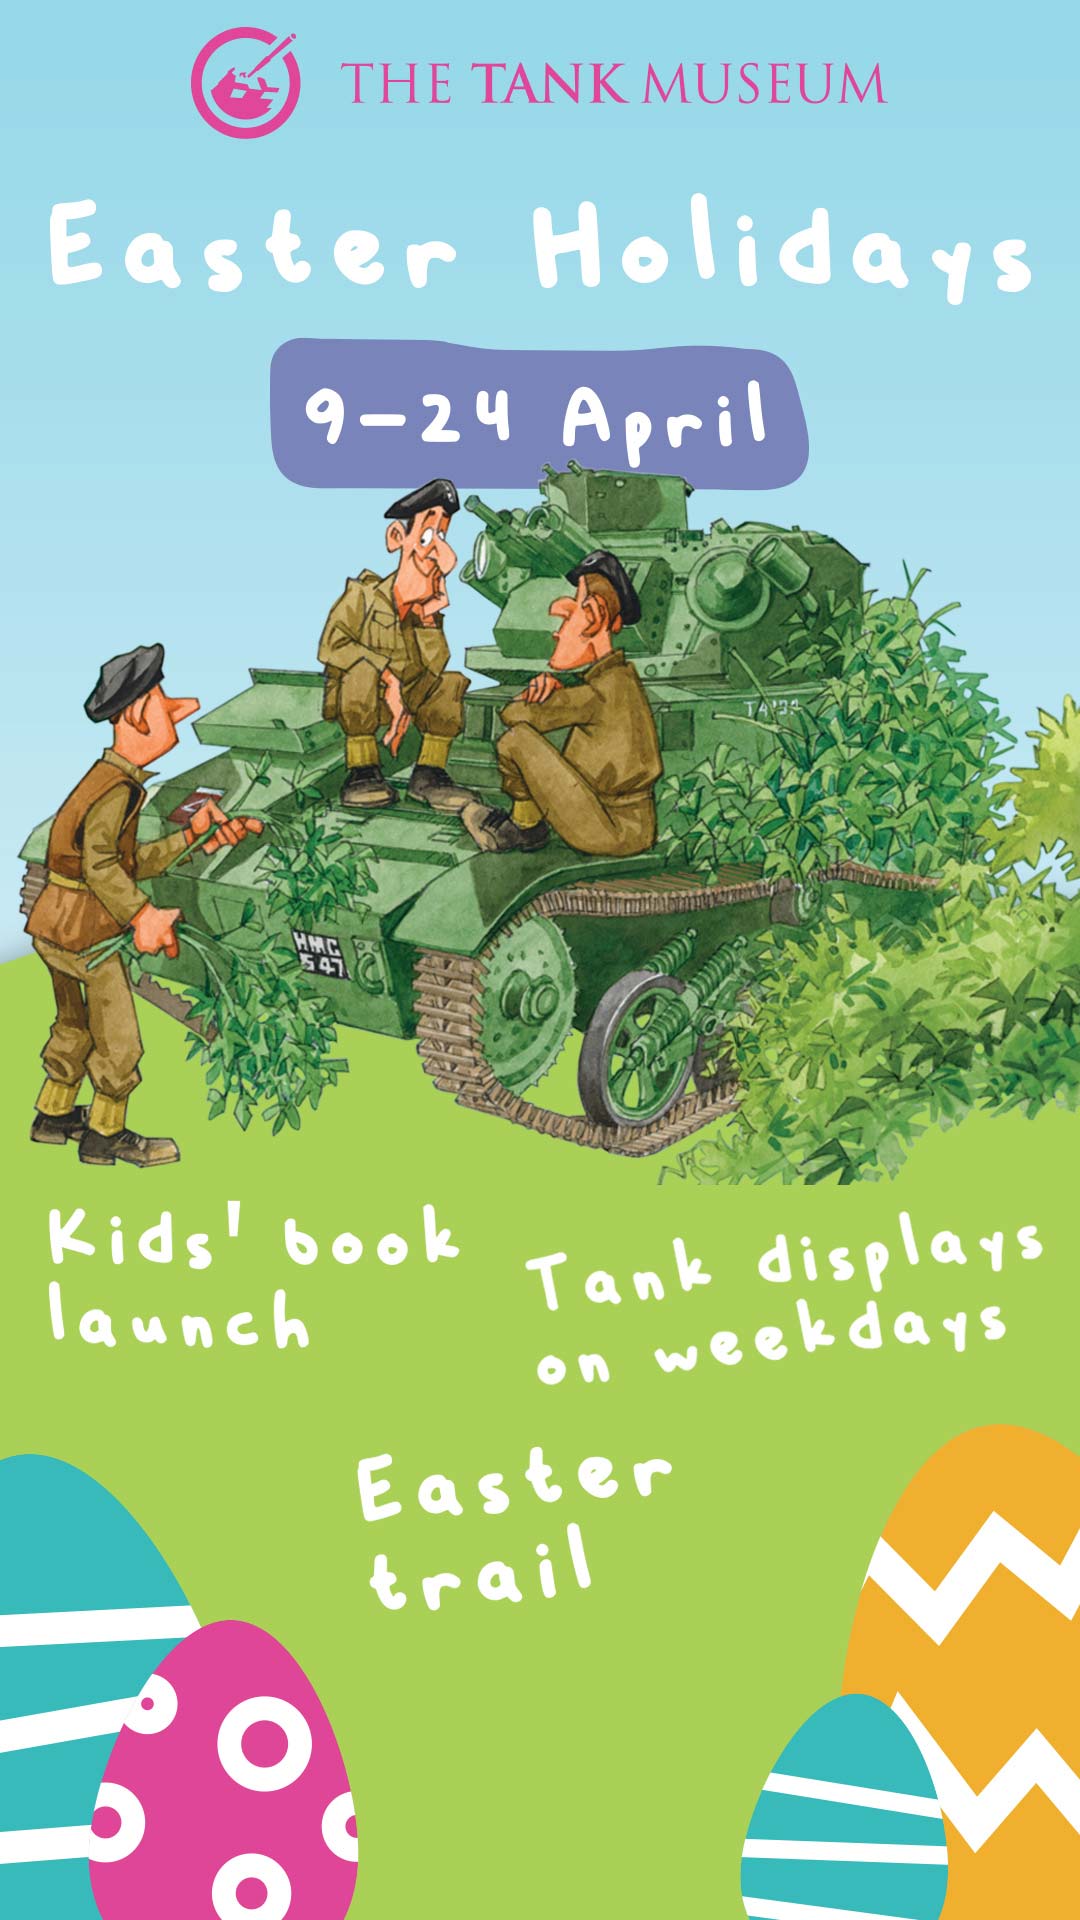 Easter Holidays at the Tank Museum